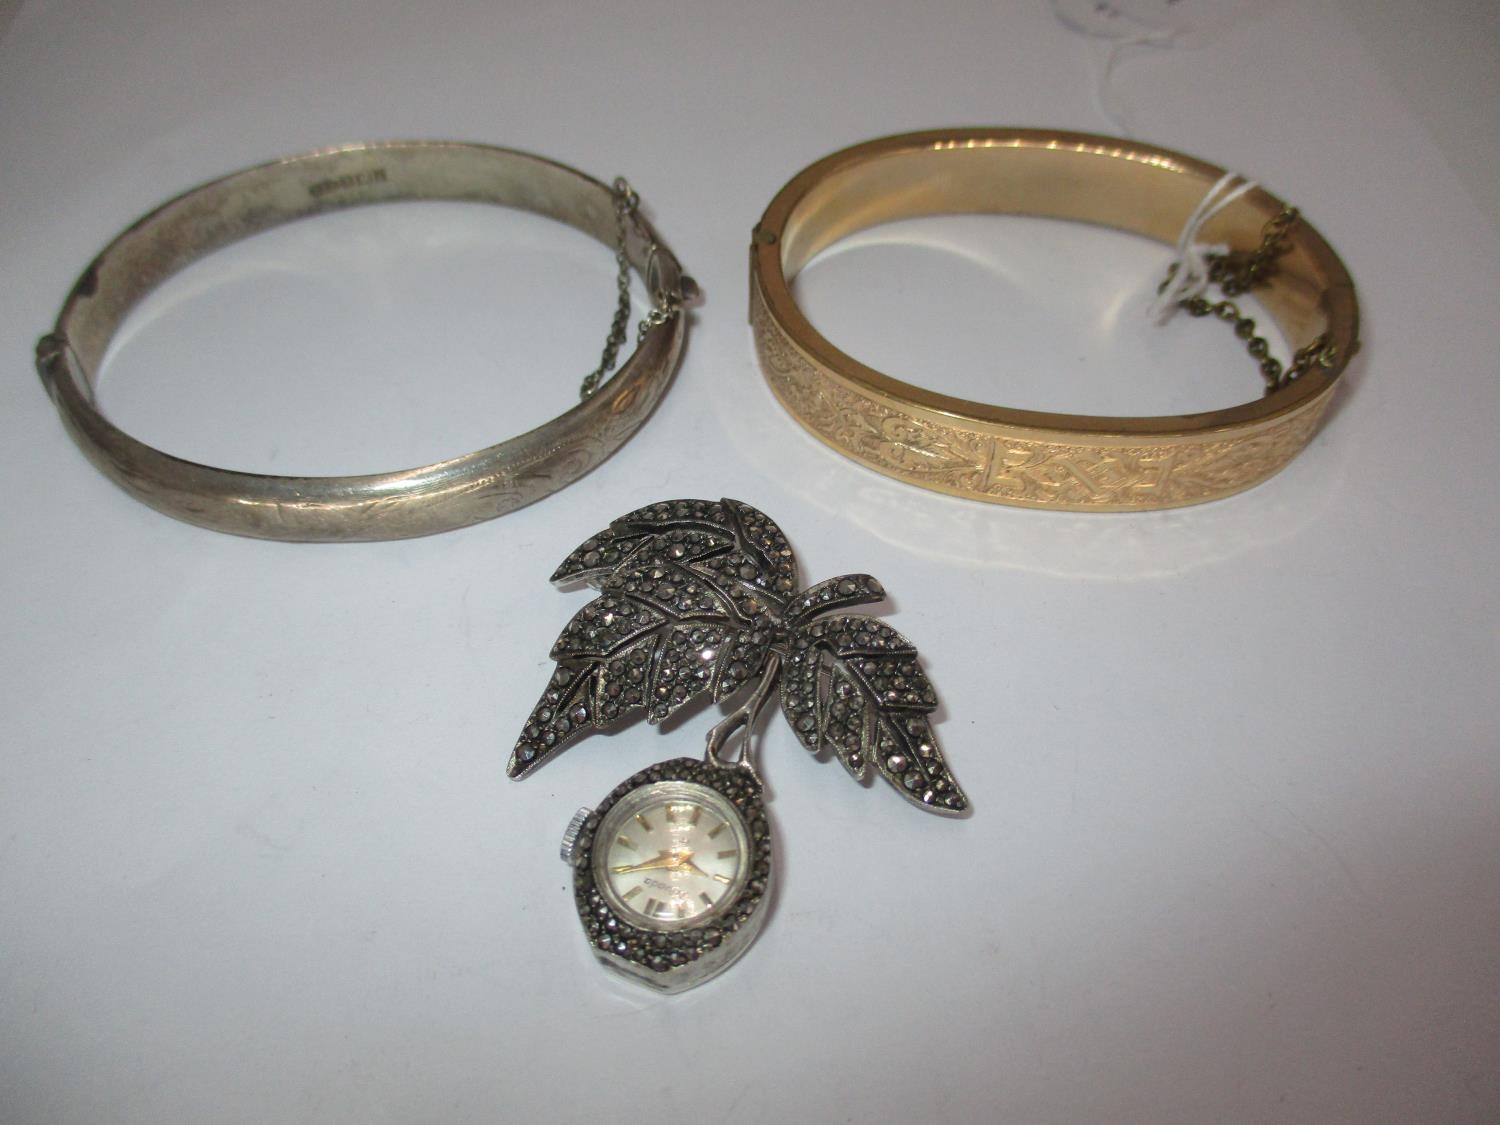 Silver and Marcasite Nivada Brooch Watch, a Silver Bangle and a Gold Plated Bangle